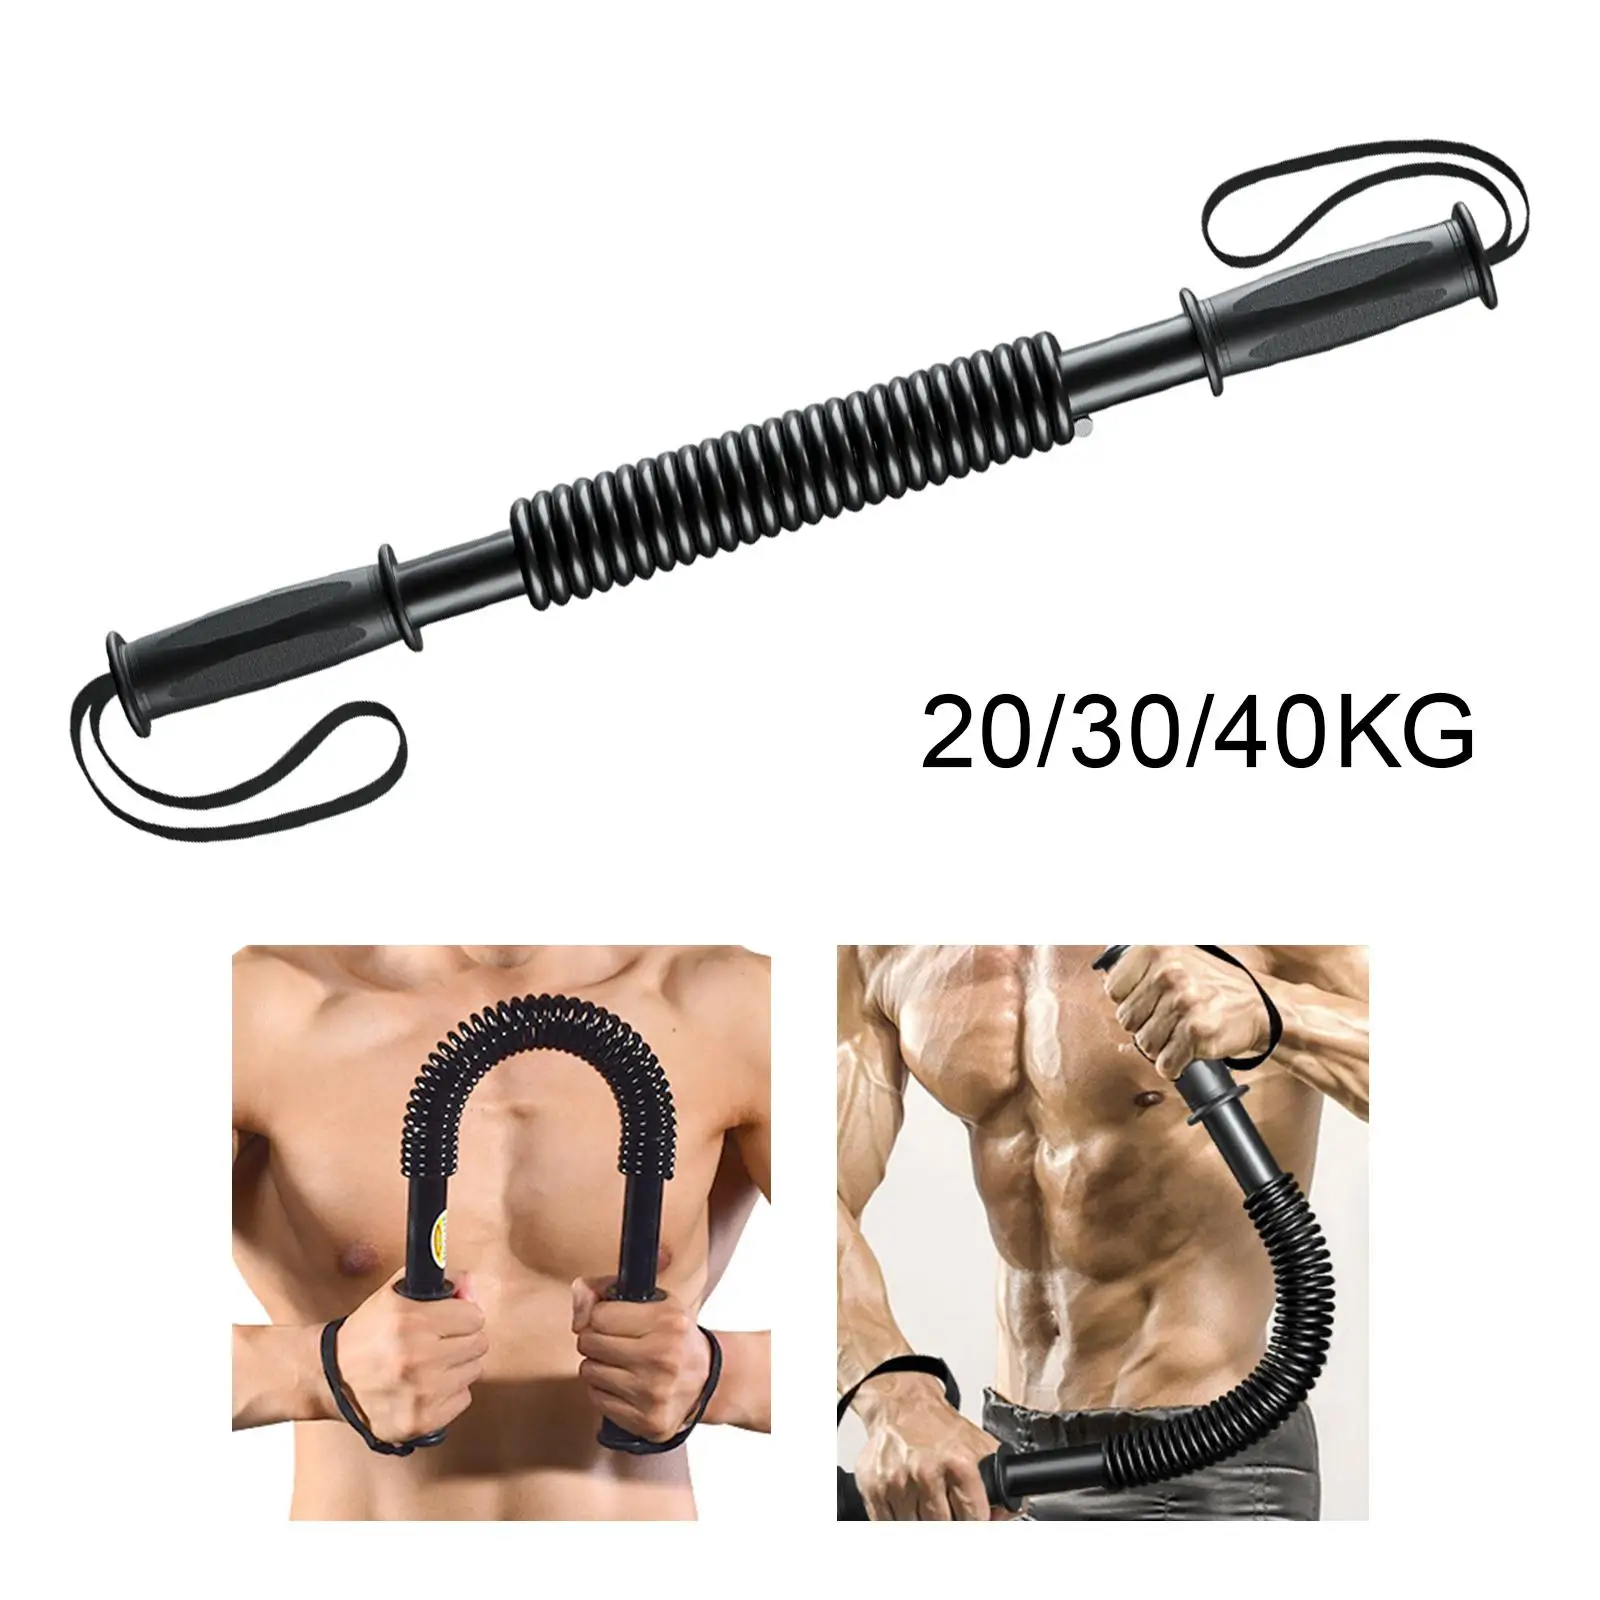 Chest Expander Spring Power Twister Bar Upper Body Exercise Strength Training for Trainer Home Gym Shoulder Muscle Pulling Bicep